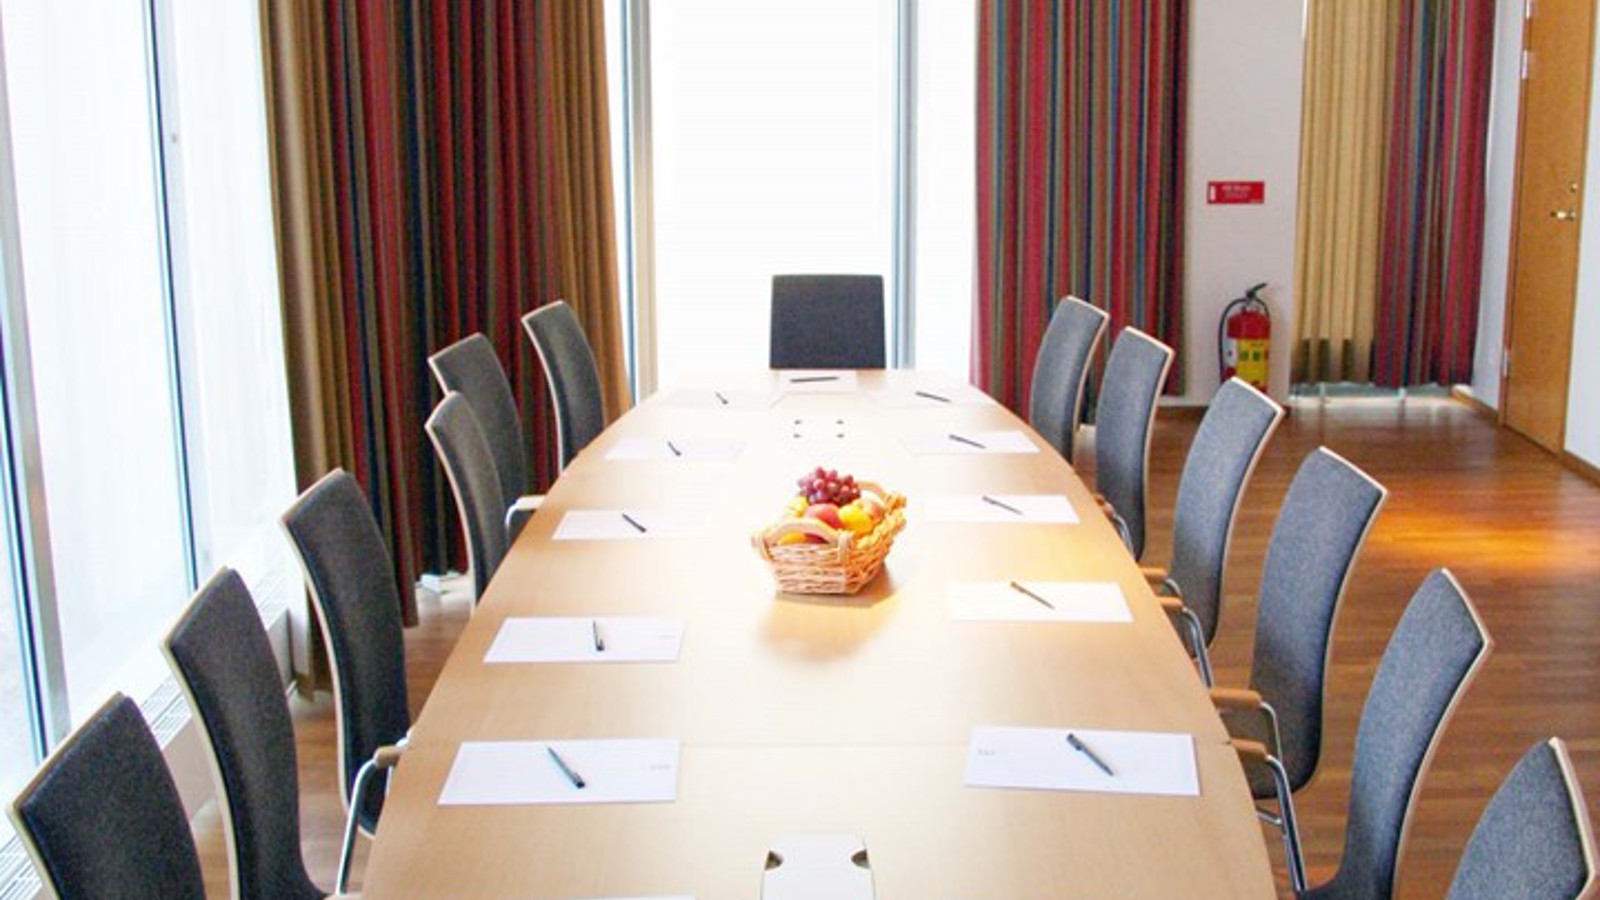 Conference room with board seating, wooden tables, large windows and colorful curtains